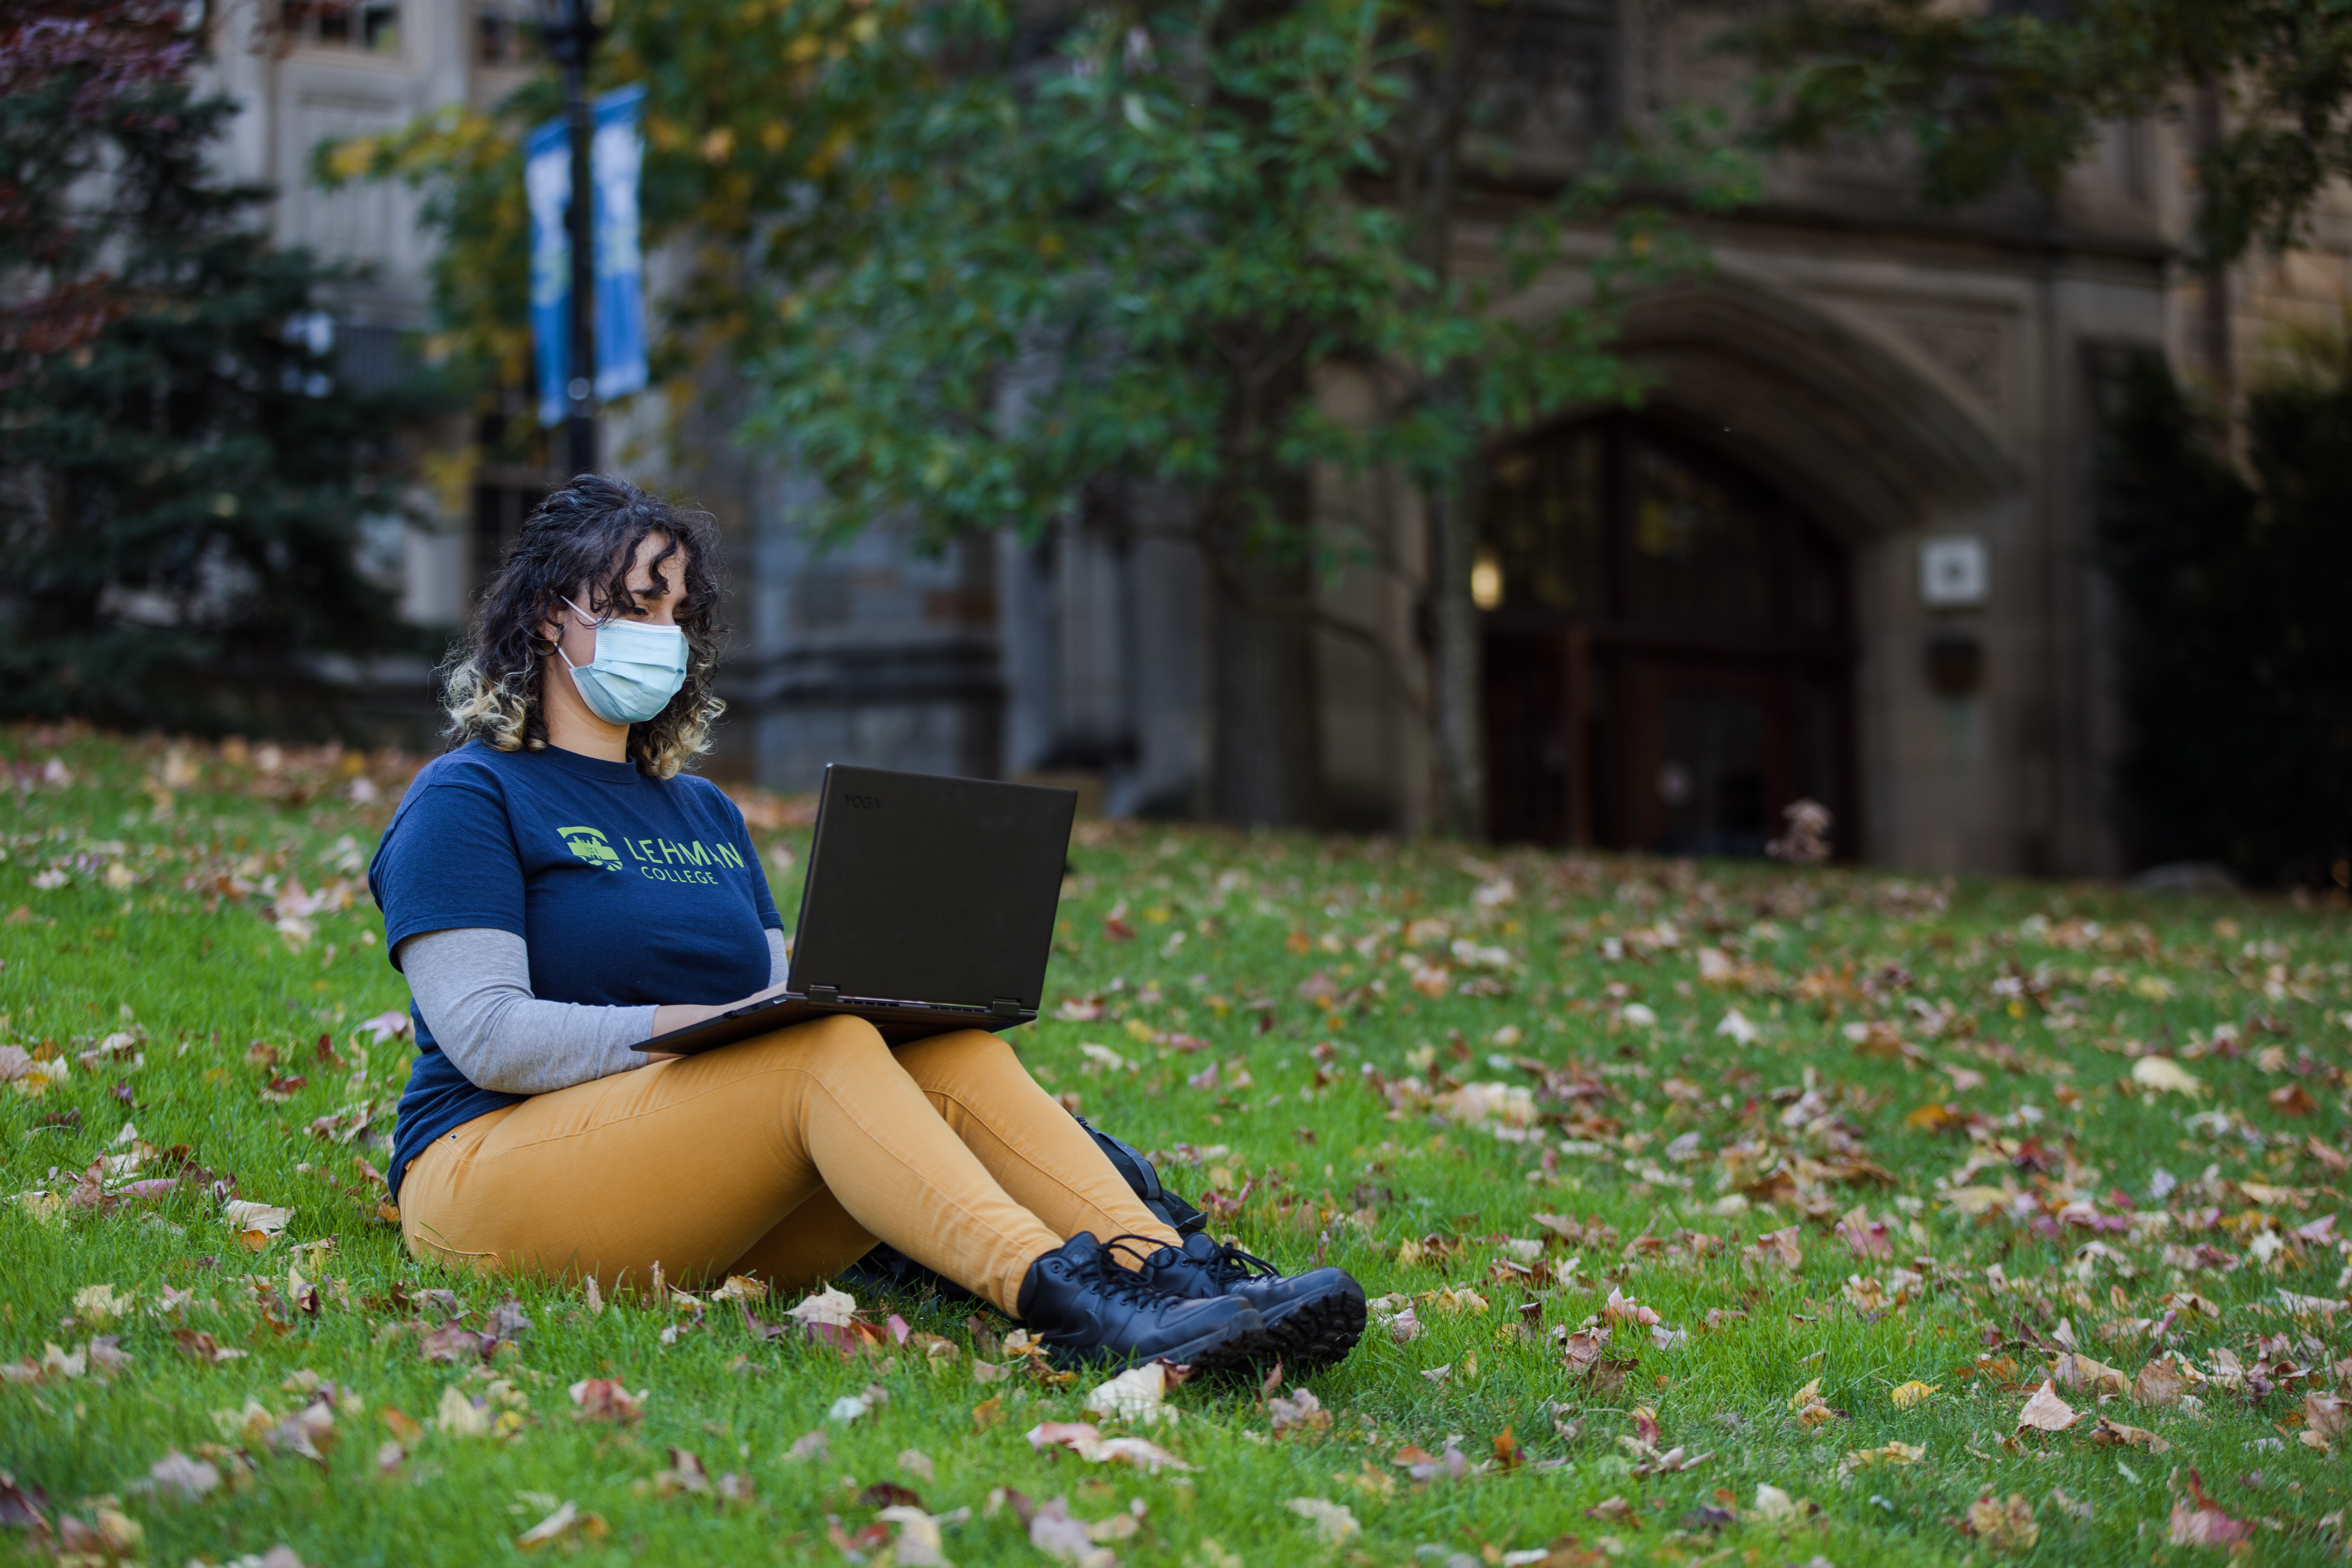 A young woman with a Lehman College T-shirt, masked and on campus, using a laptop